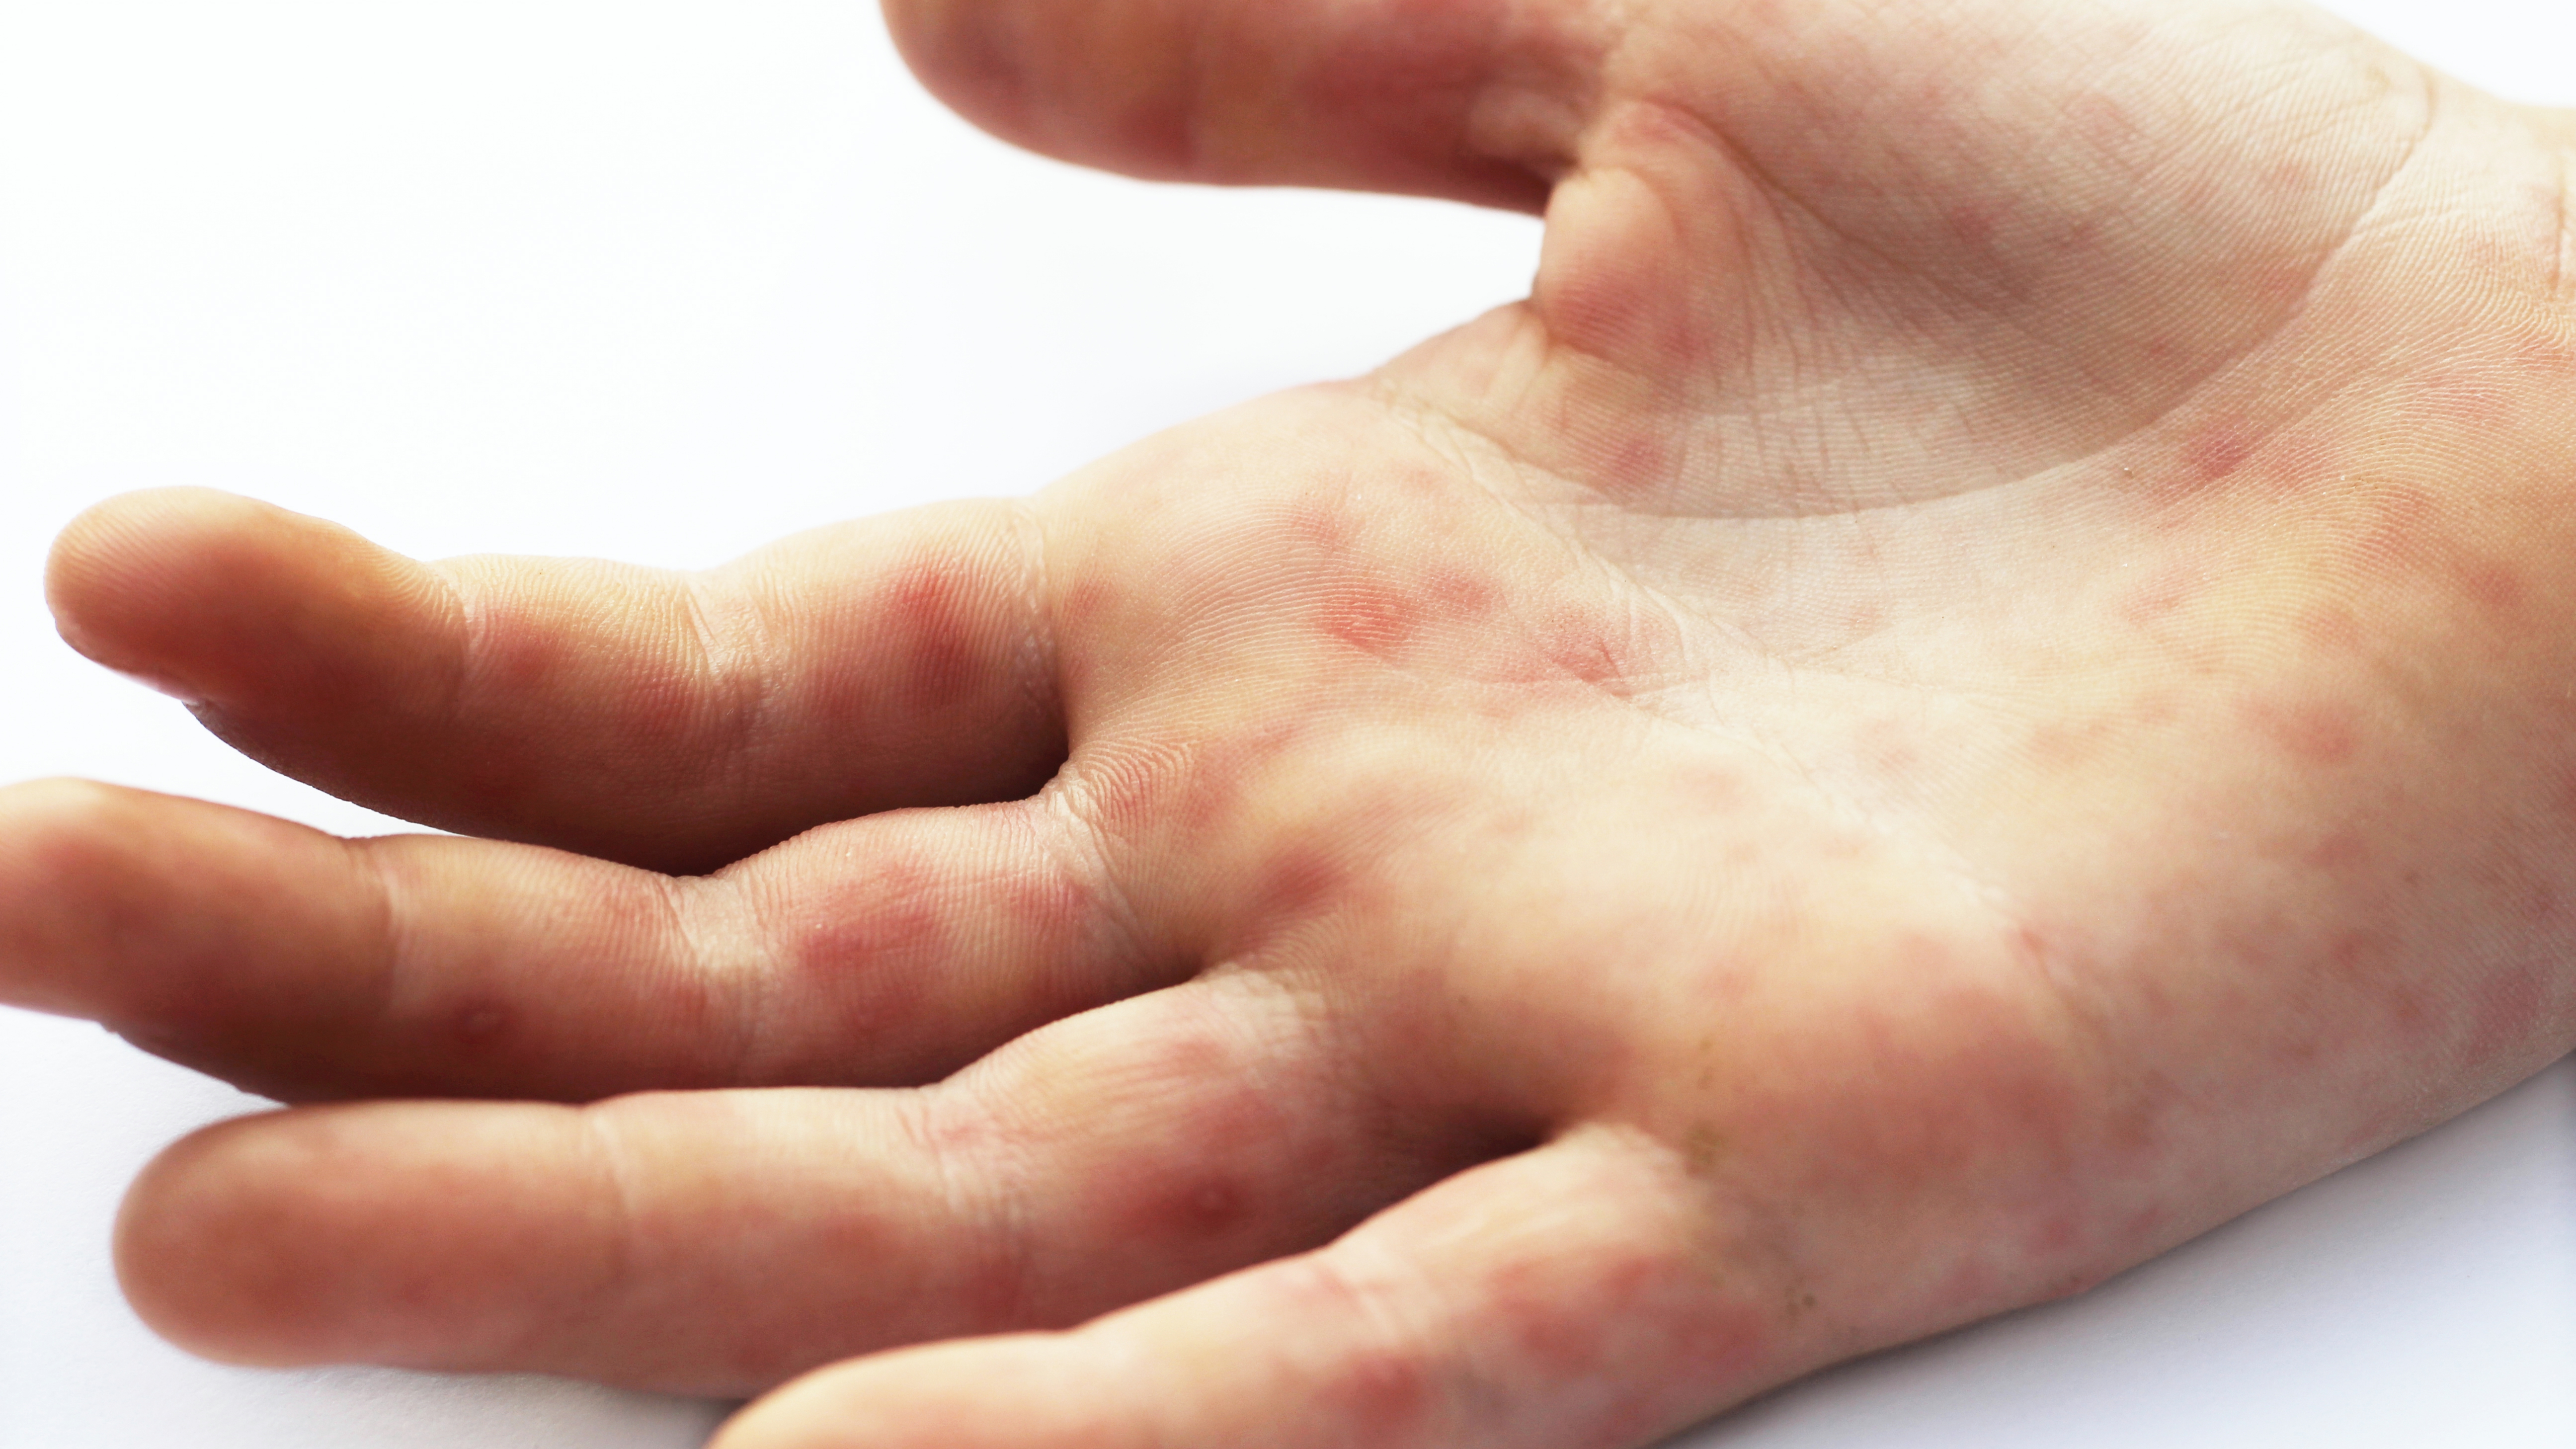 Hand foot and mouth disease with red rash on the palm of the hand. Enterovirus. Coxsackie virus.